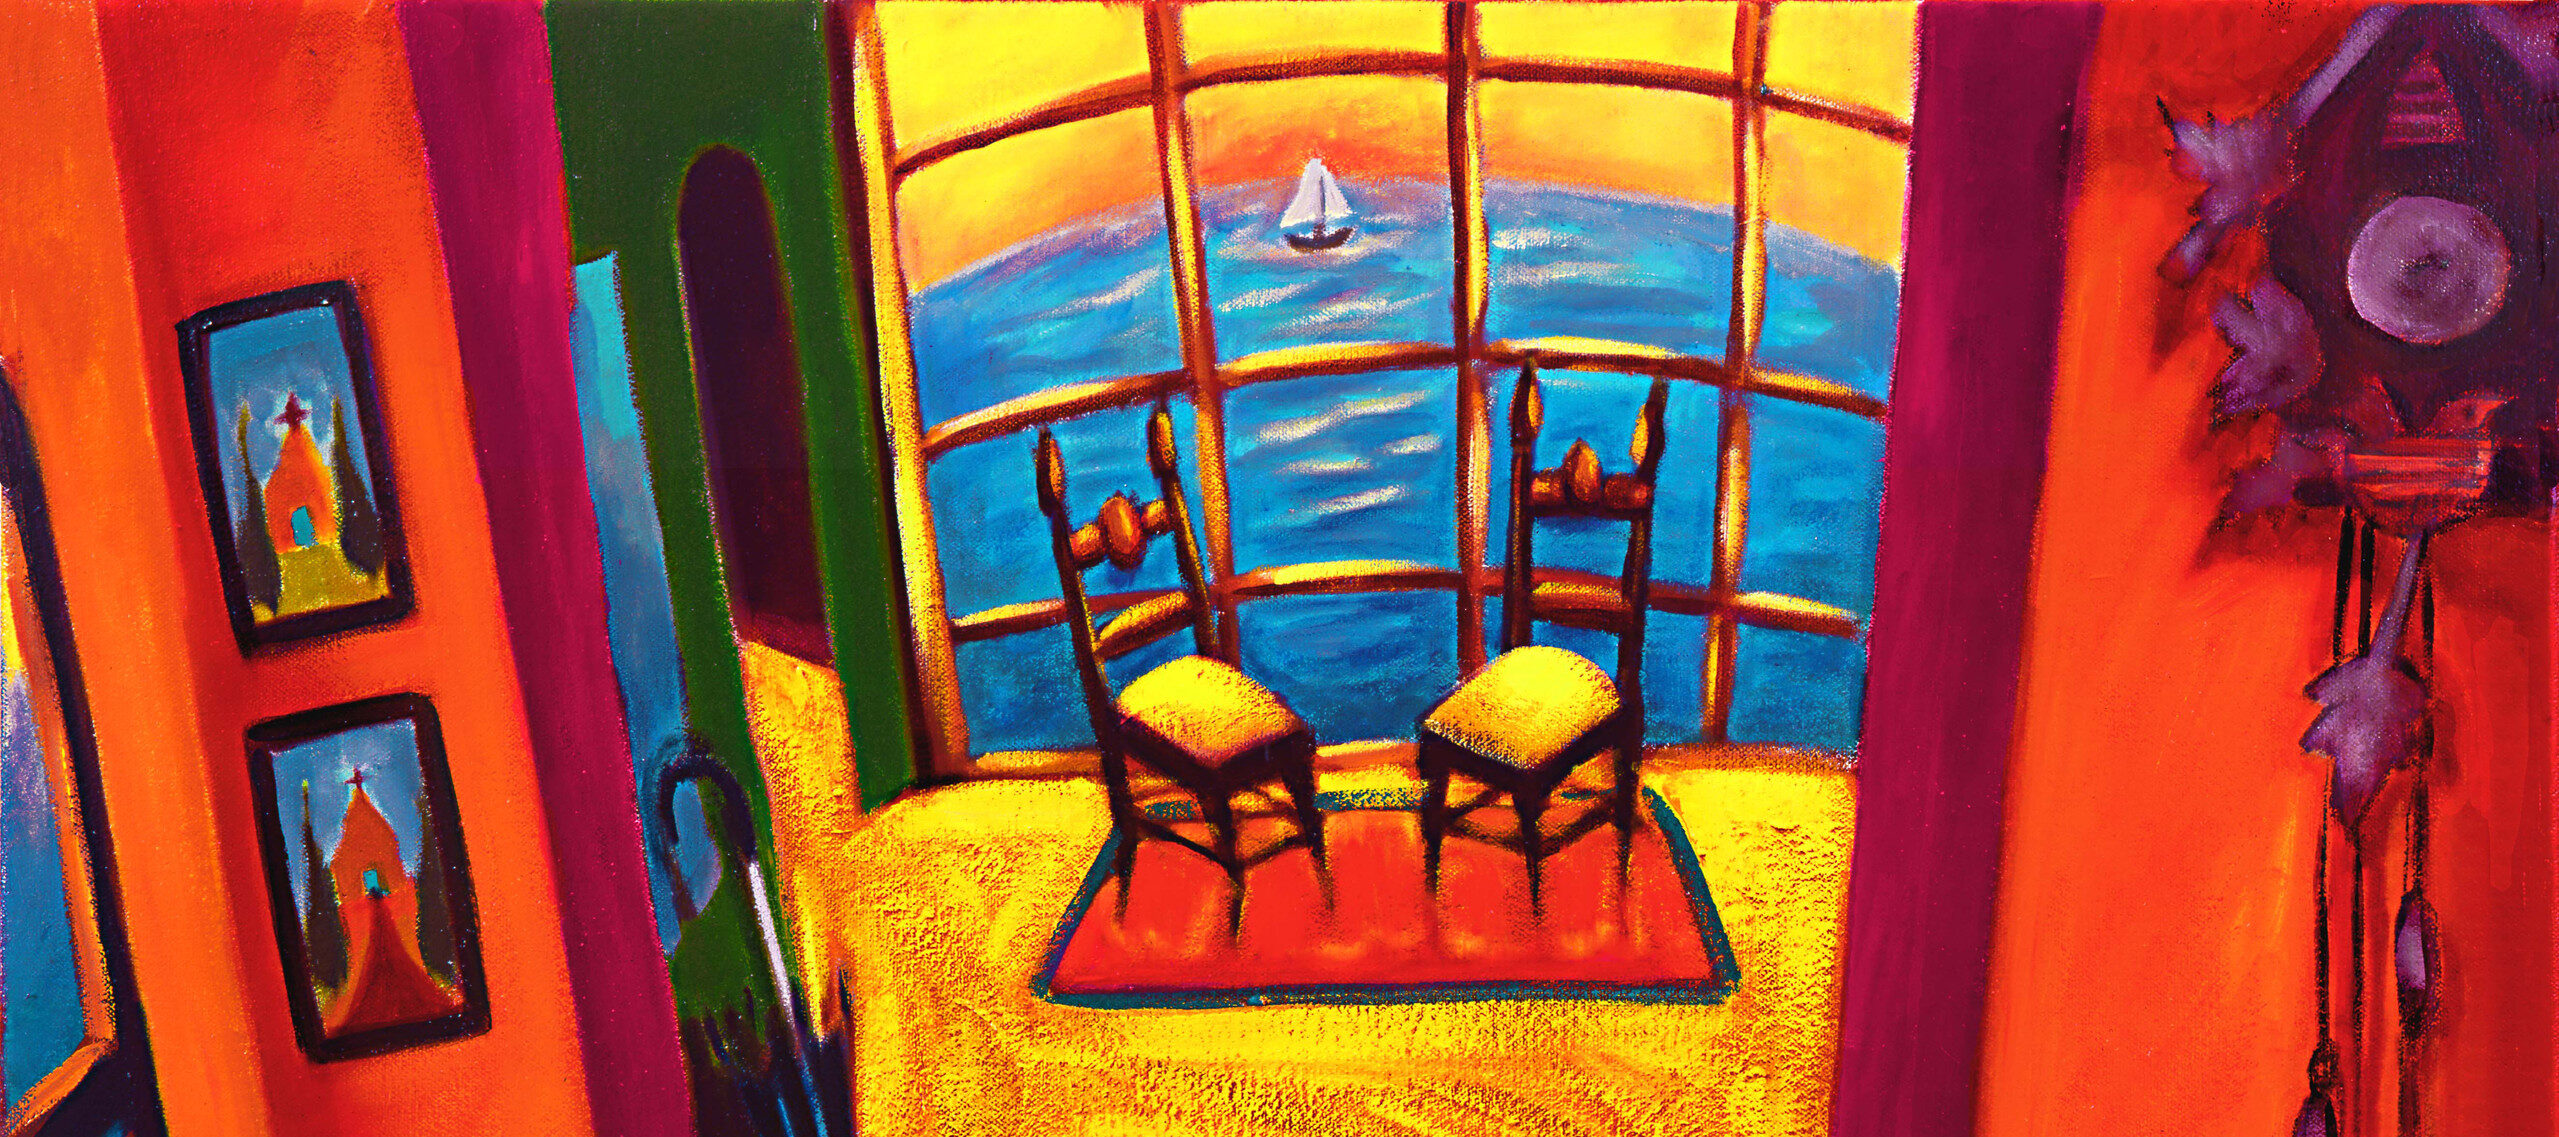 A vibrant, colorful painting of a kitchen and sitting area by a window overlooking a sailboat on the water. There are multiple chairs, a set table, and a carpet, and the colors are primarily warm oranges, golden yellows, and rich reds with complements of cool azure and indigo.